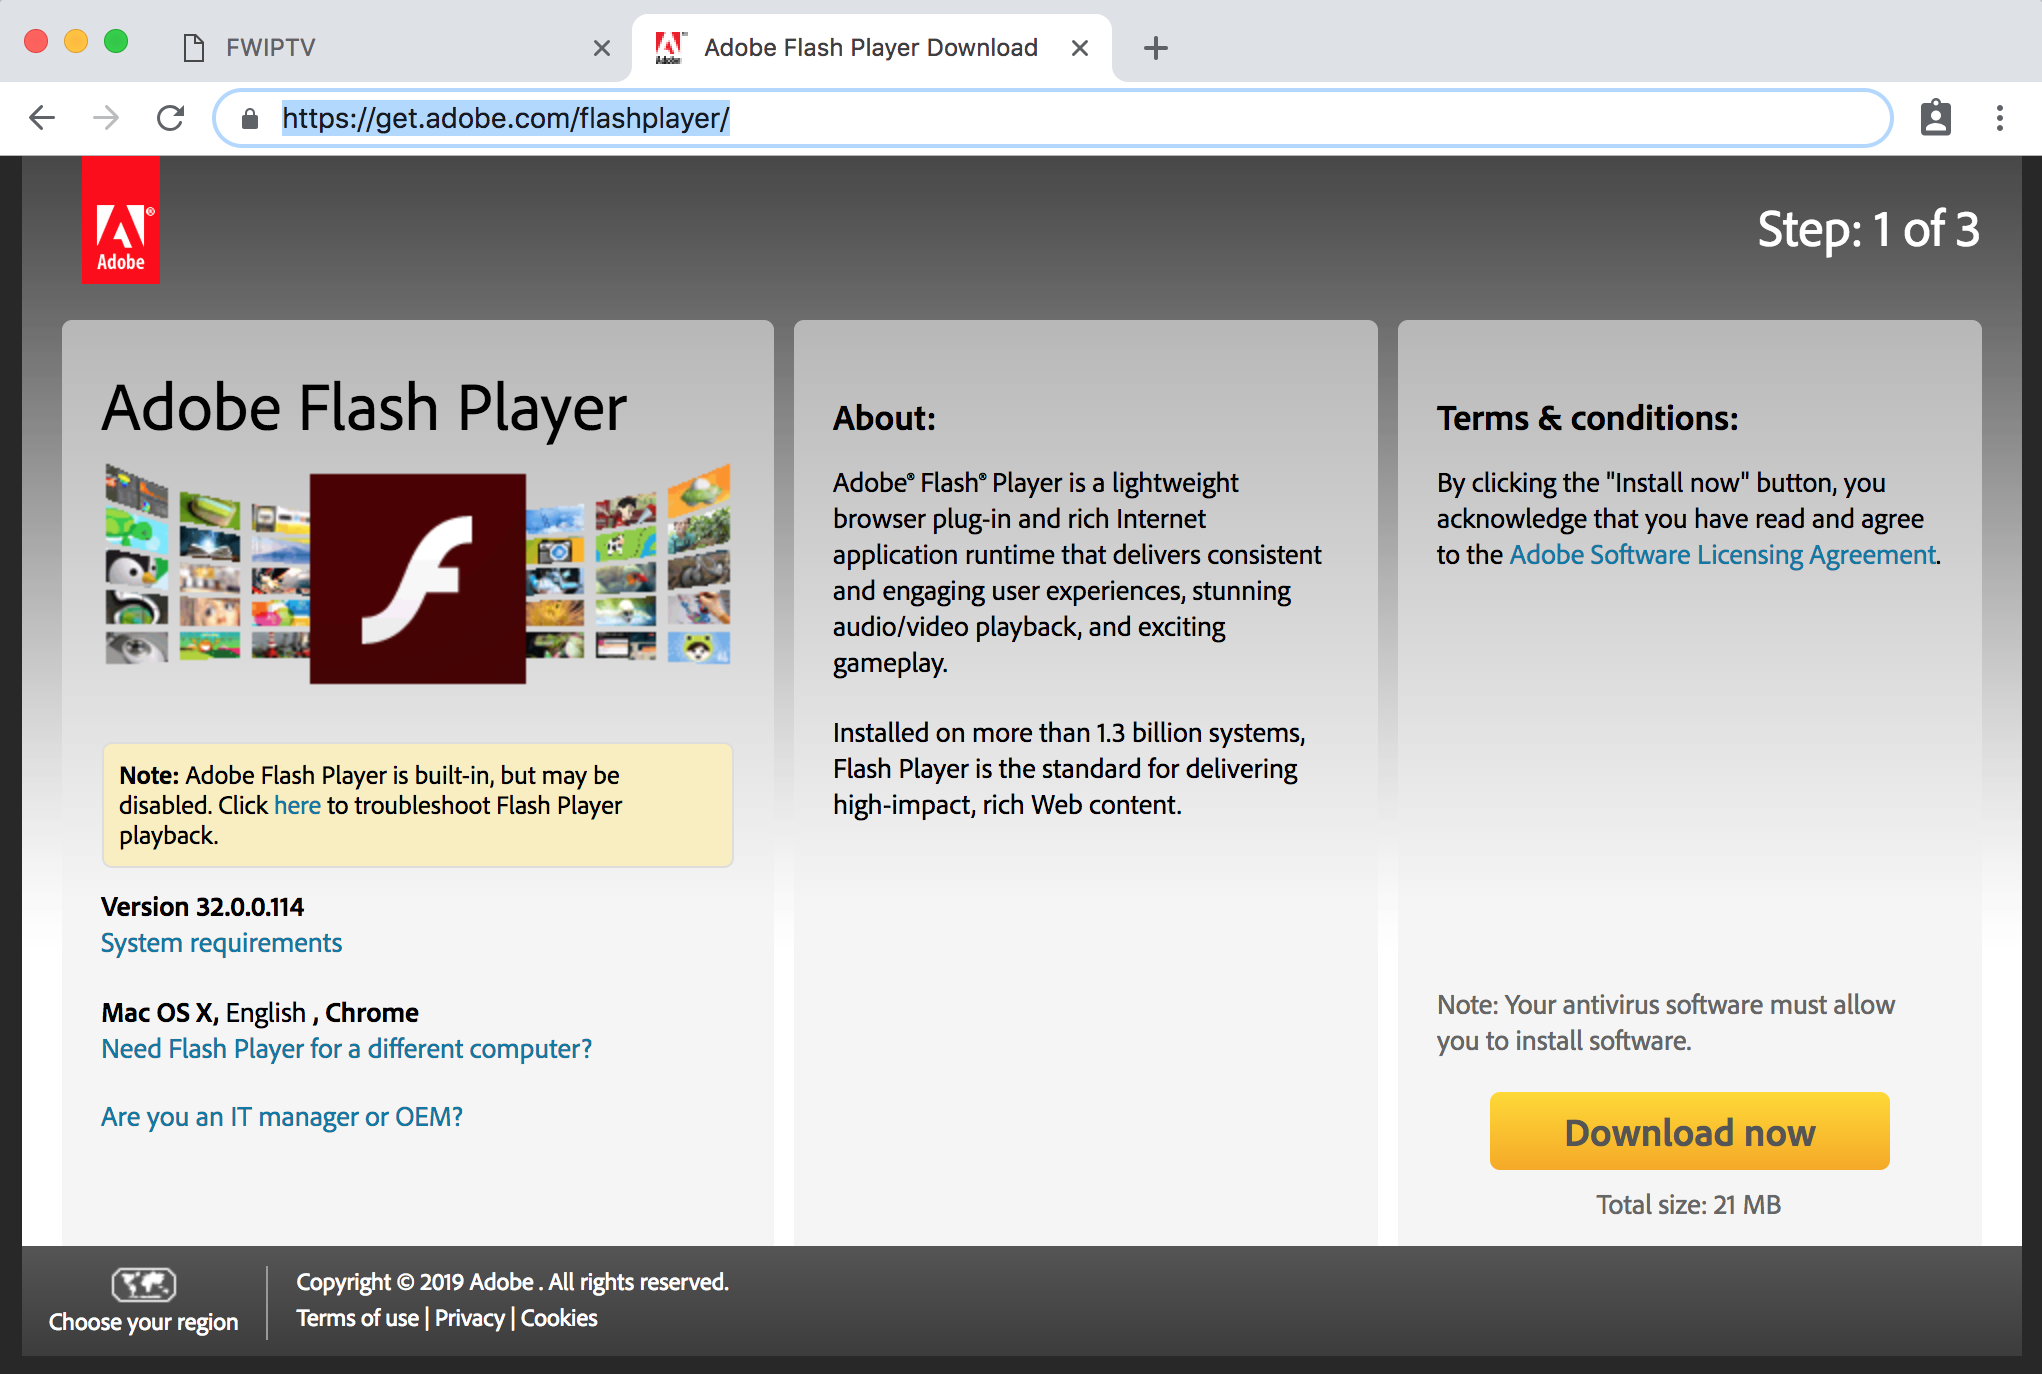 Download Flash Player